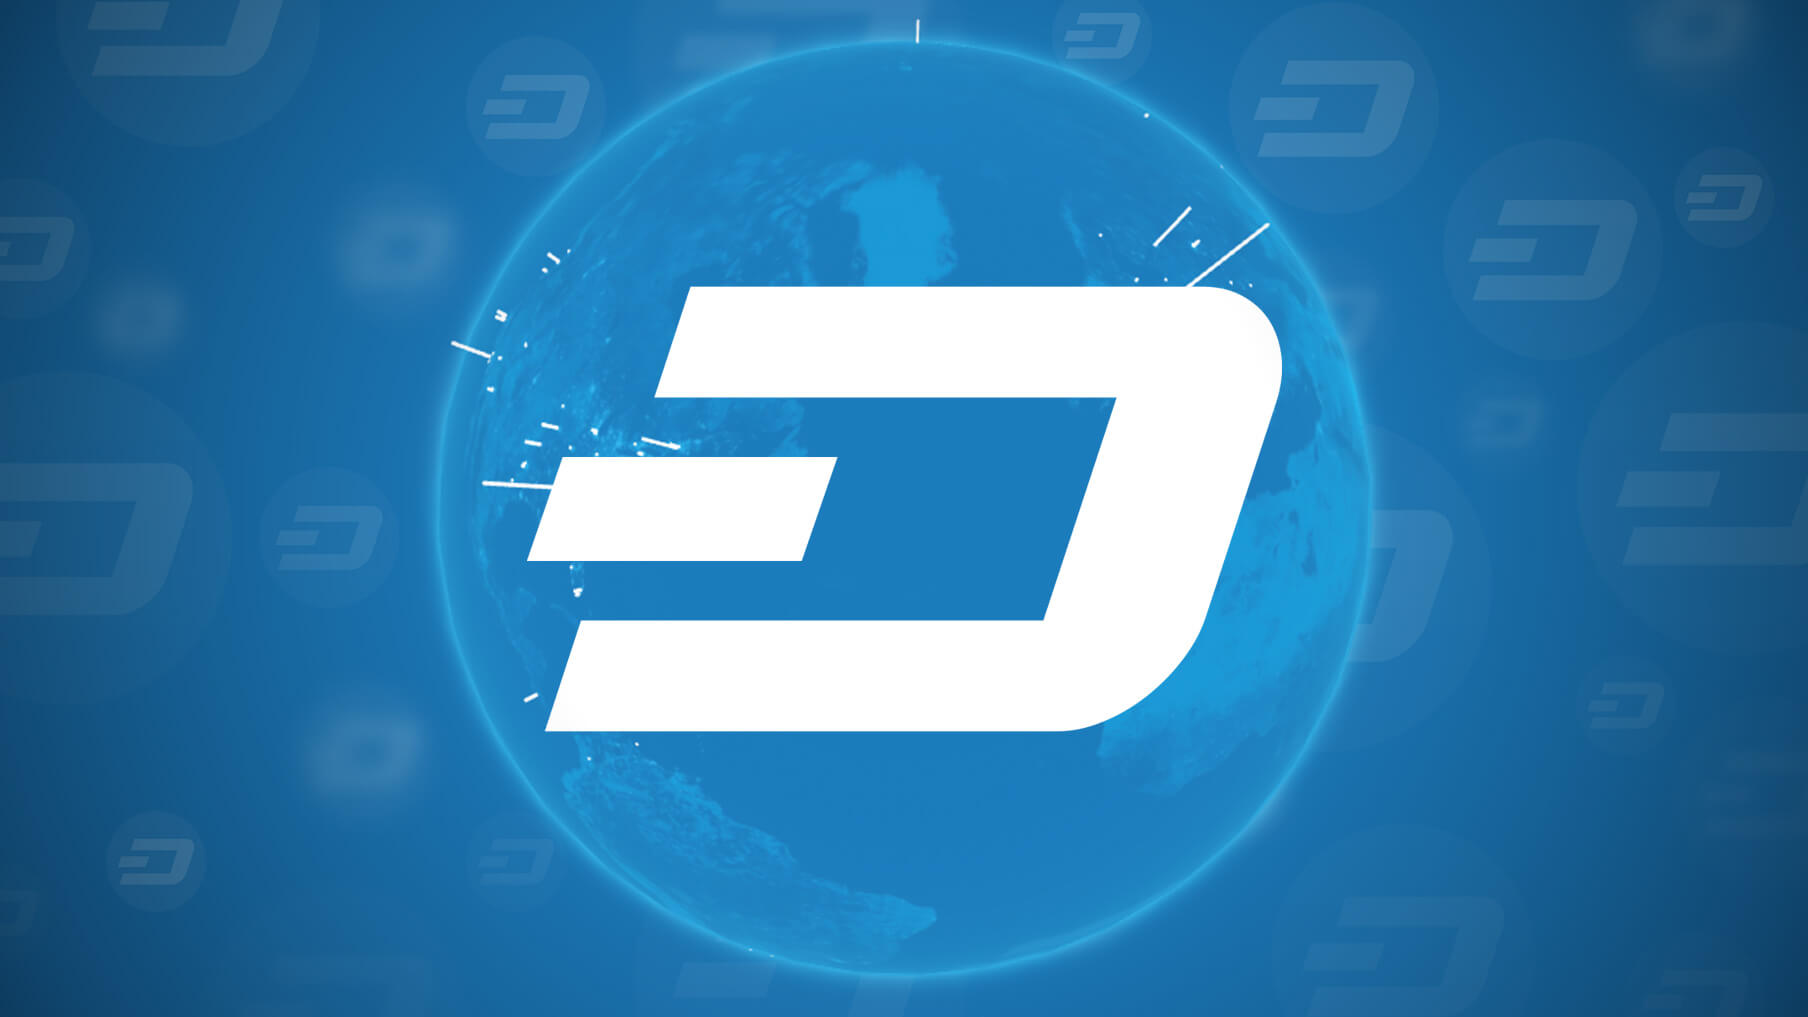 How to send money from dash wallet биткоин биржевой товар